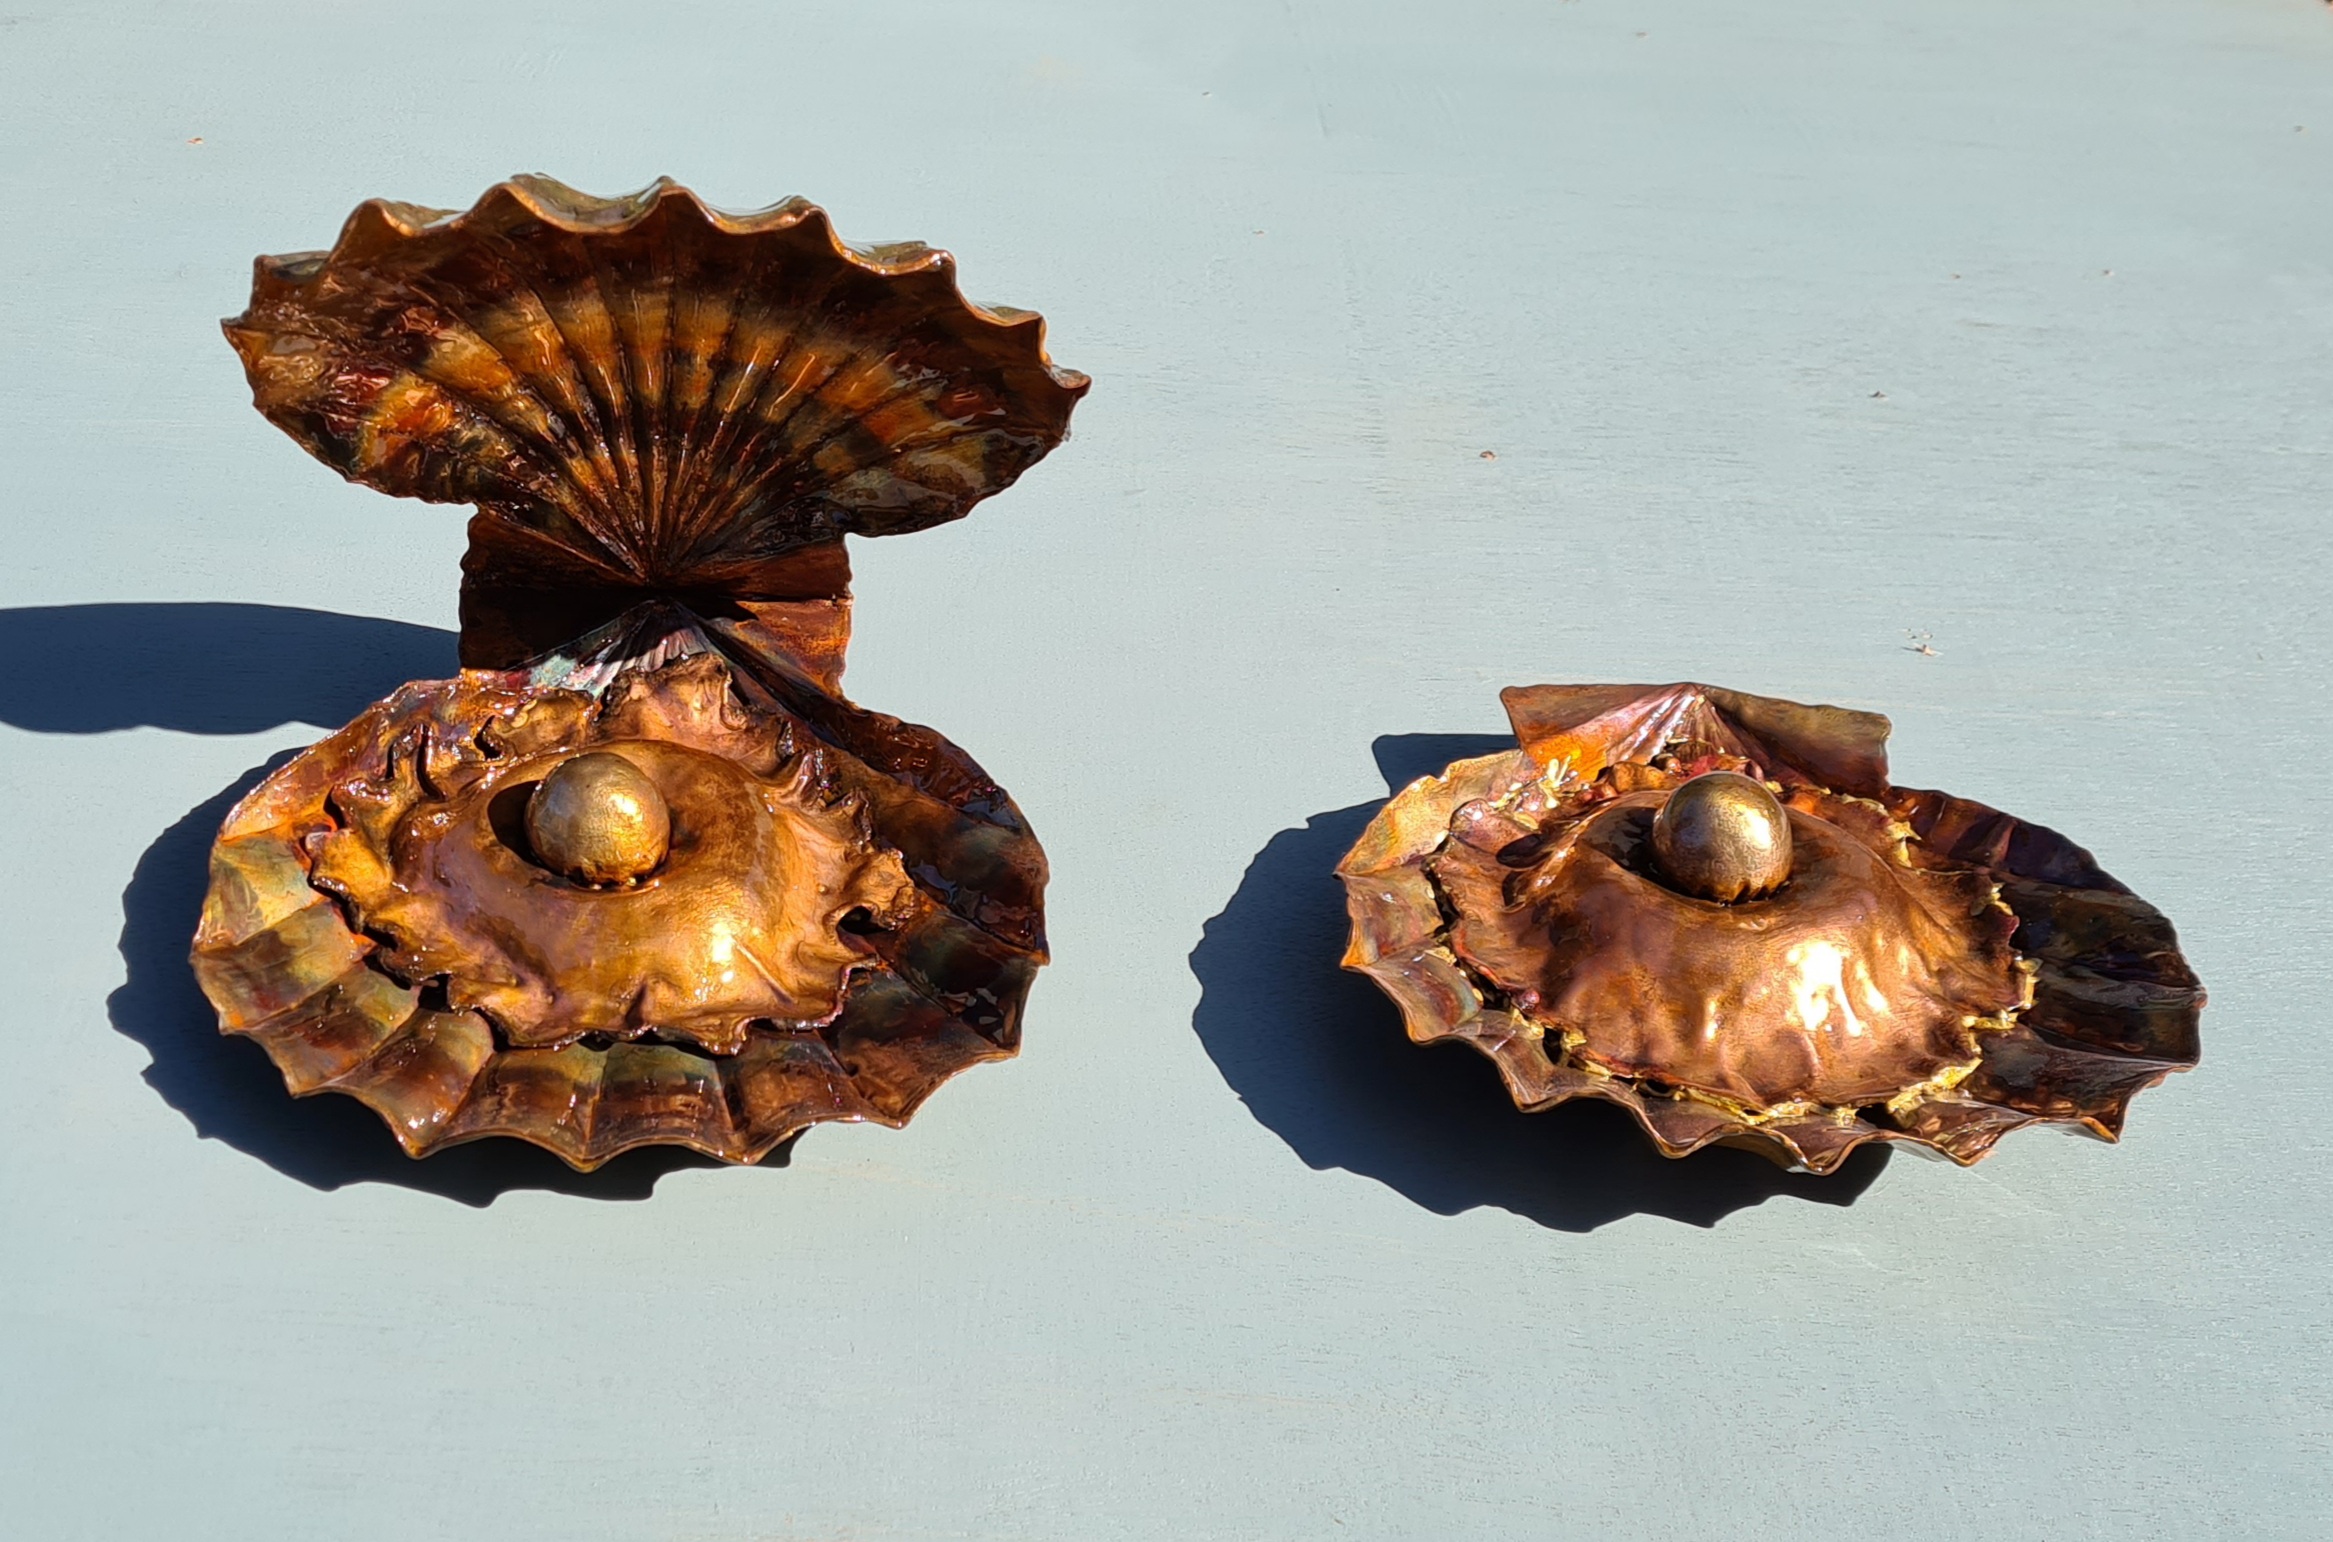 https://www.coppercreatures.co.uk/wp-content/uploads/2021/03/Emily-Stone-copper-clam-shells-with-pearl-sculpture-both.jpg